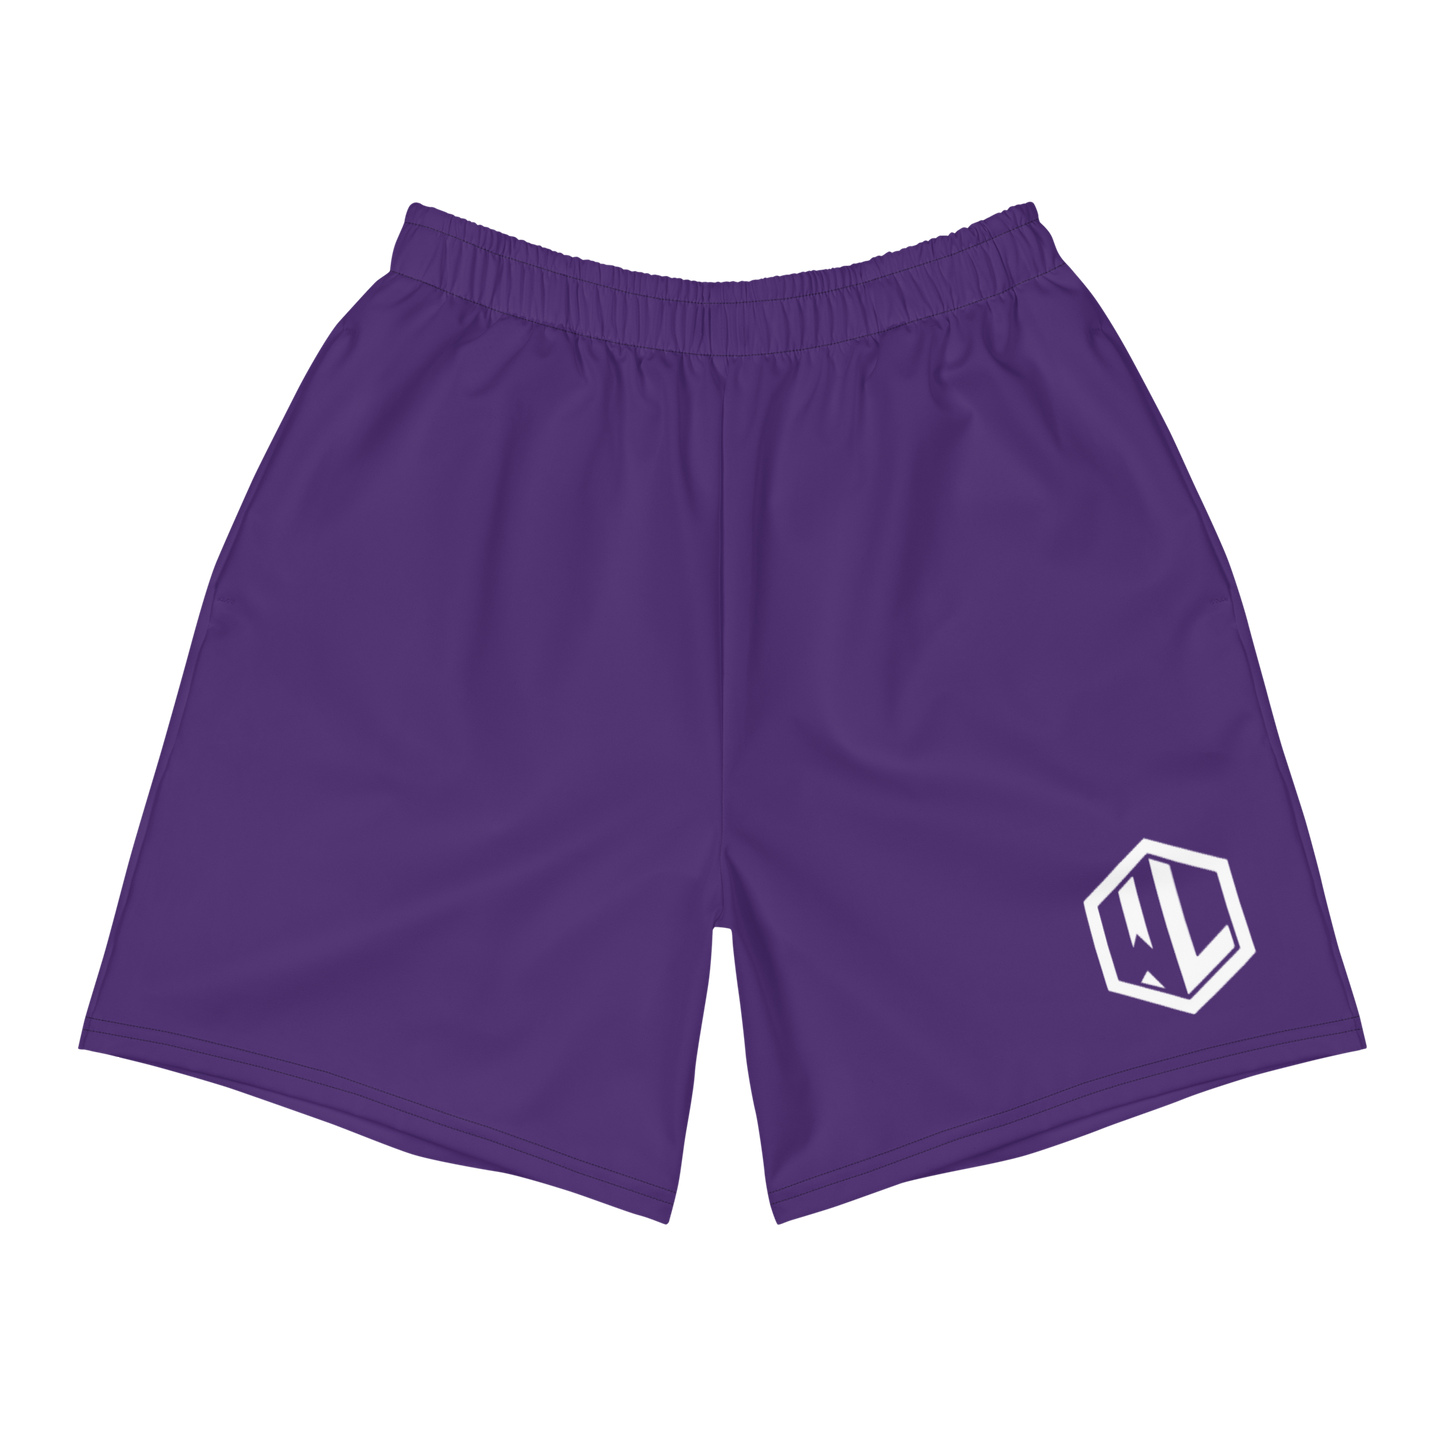 WILL LEE ATHLETIC SHORTS